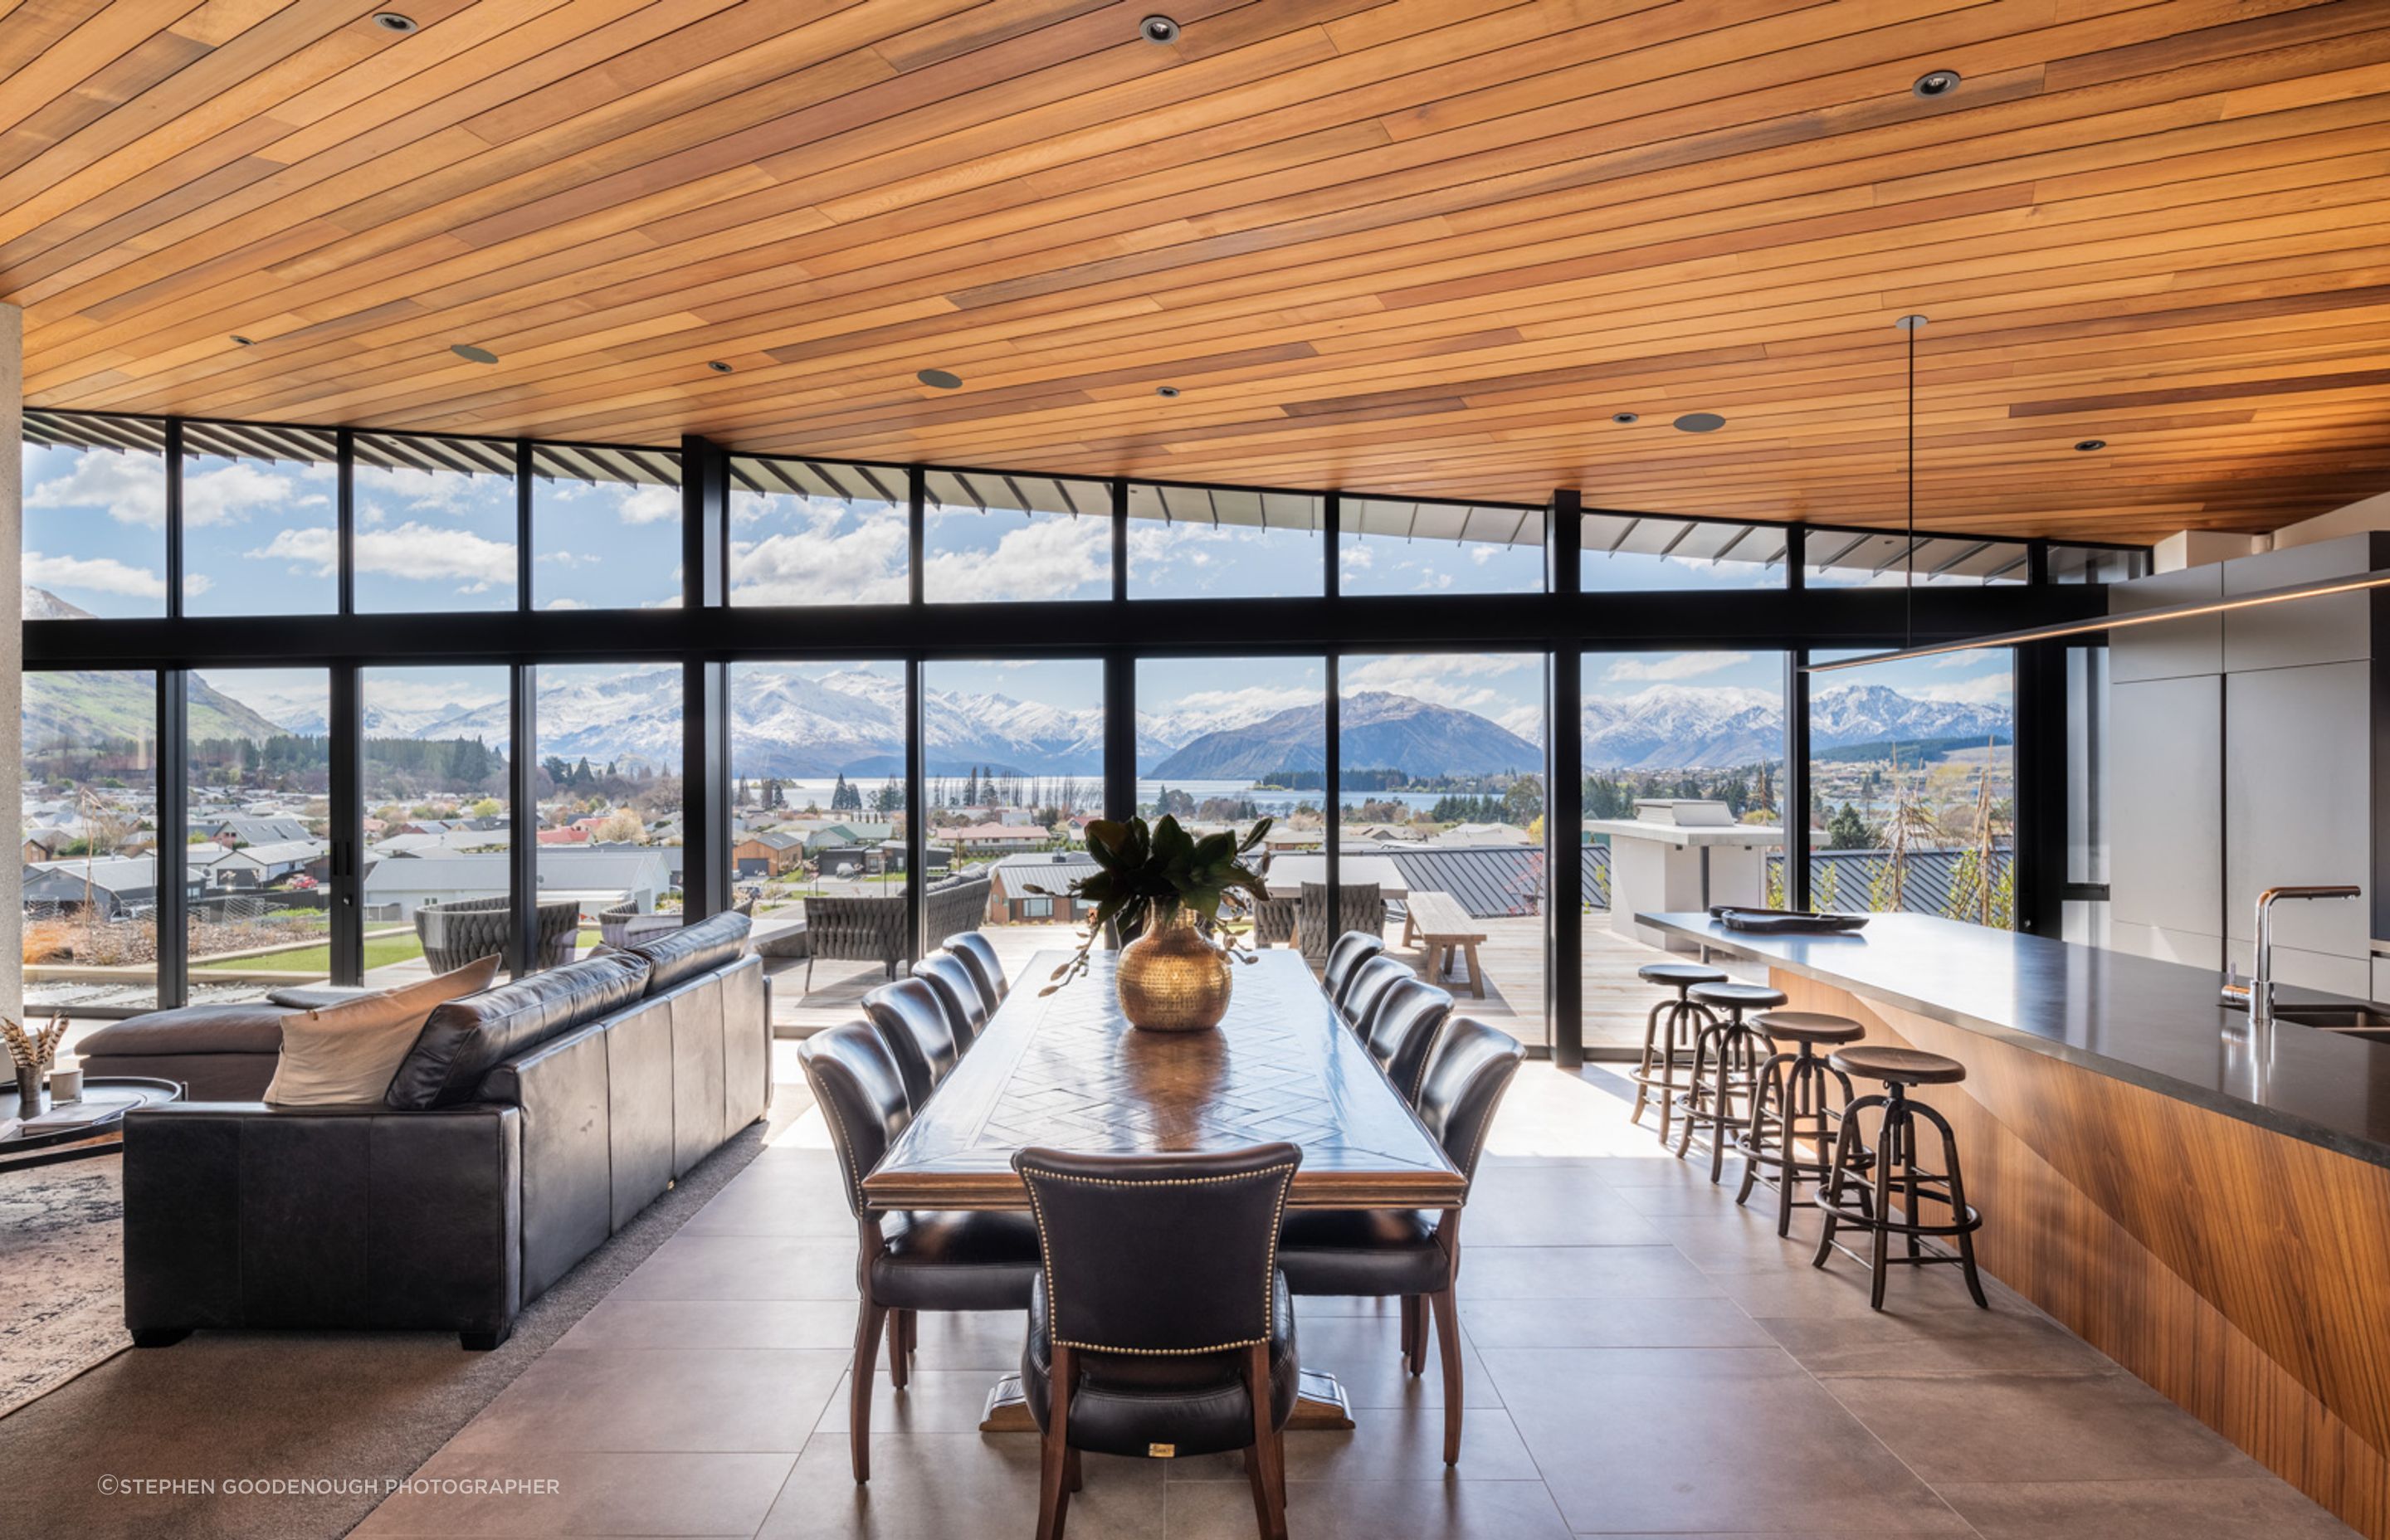 The uninterrupted views of the lake and mountains beyond is truly breathtaking, and the interior materiality reflects the earthy hues of the landscape.